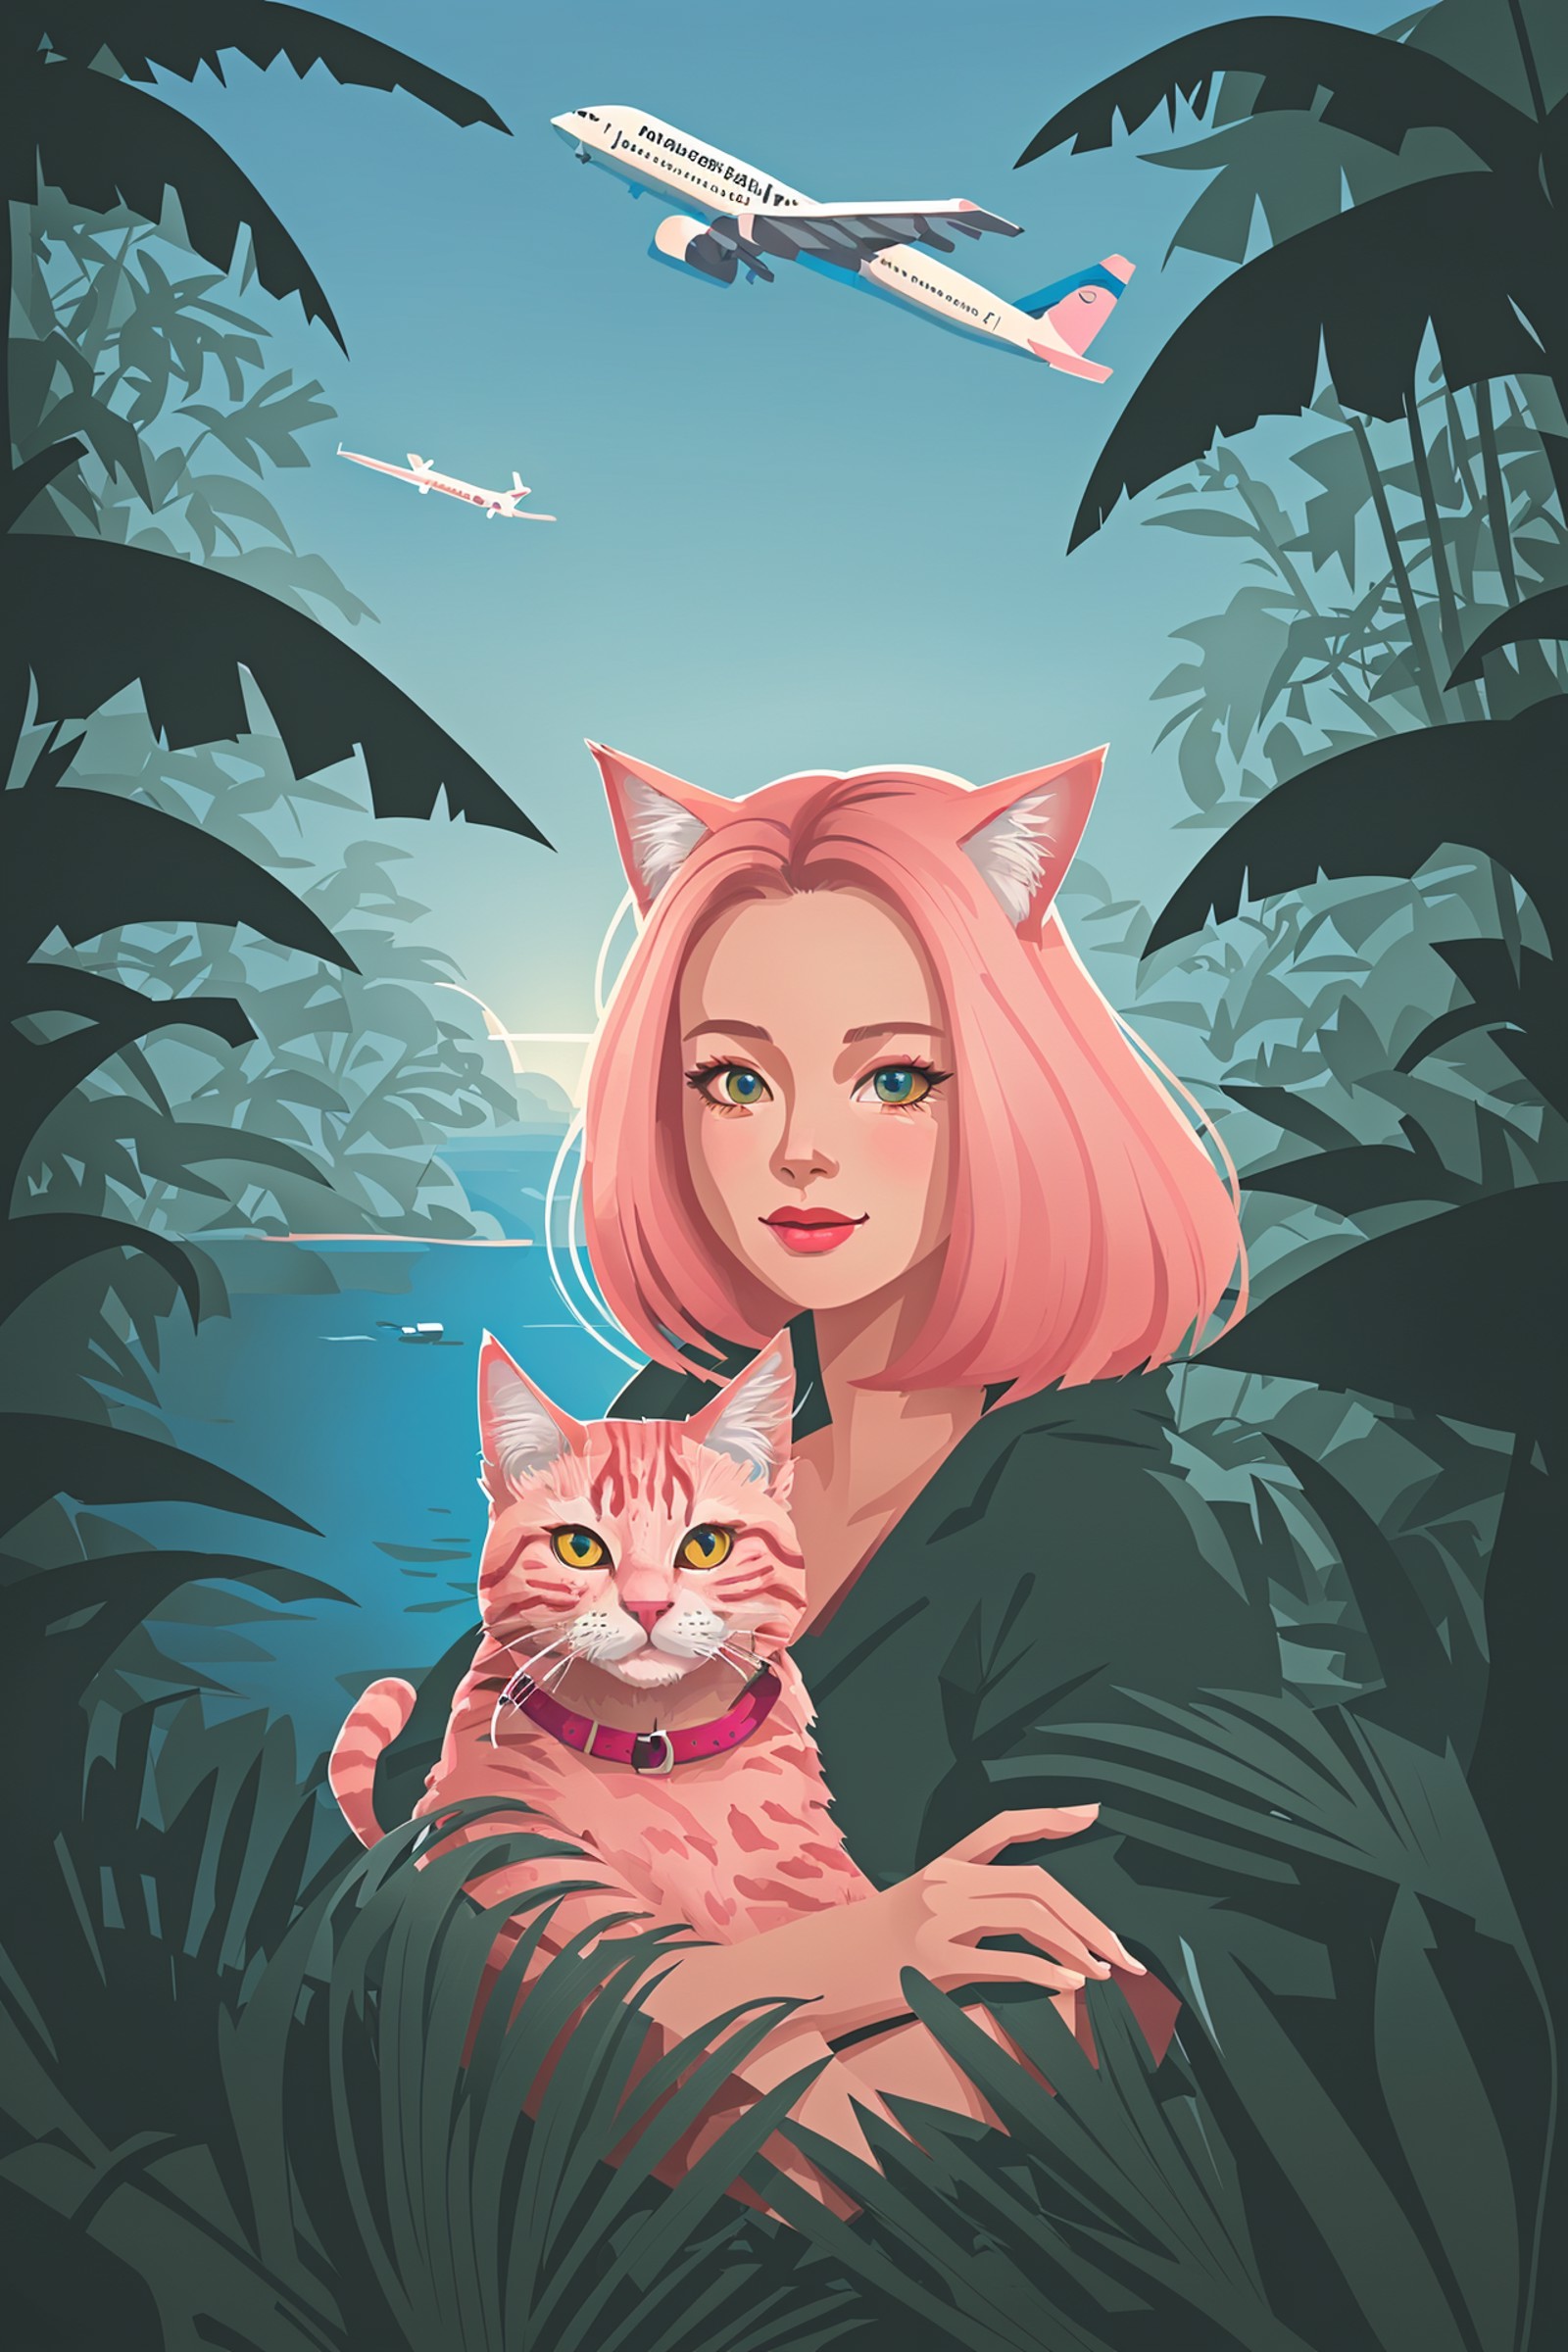 flatillustration,masterpiece,best quality,high quality,extremely detailed wallpaper,
1girl with a pink cat,portrait,island...